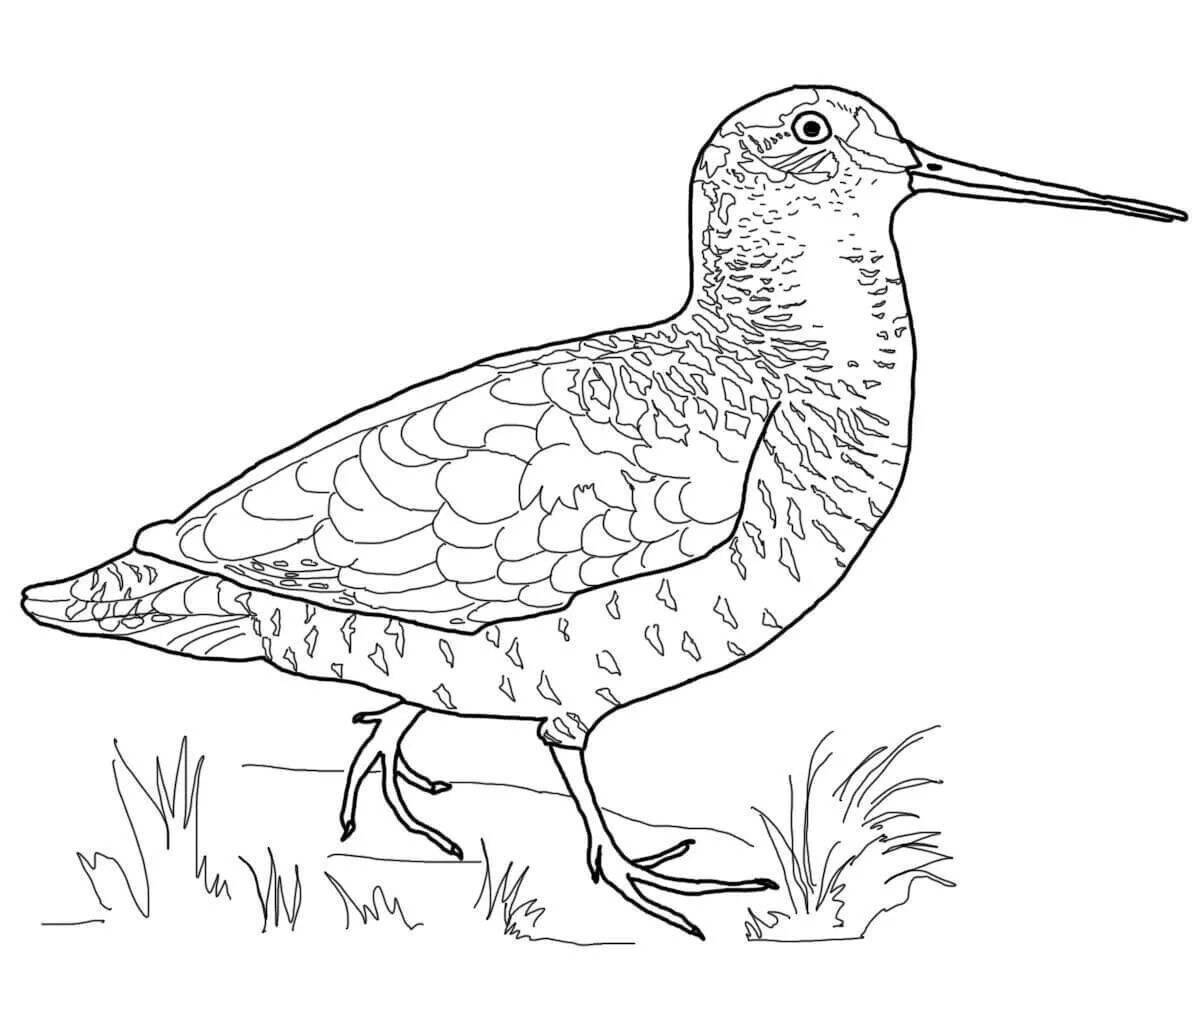 Radiated curlew coloring page